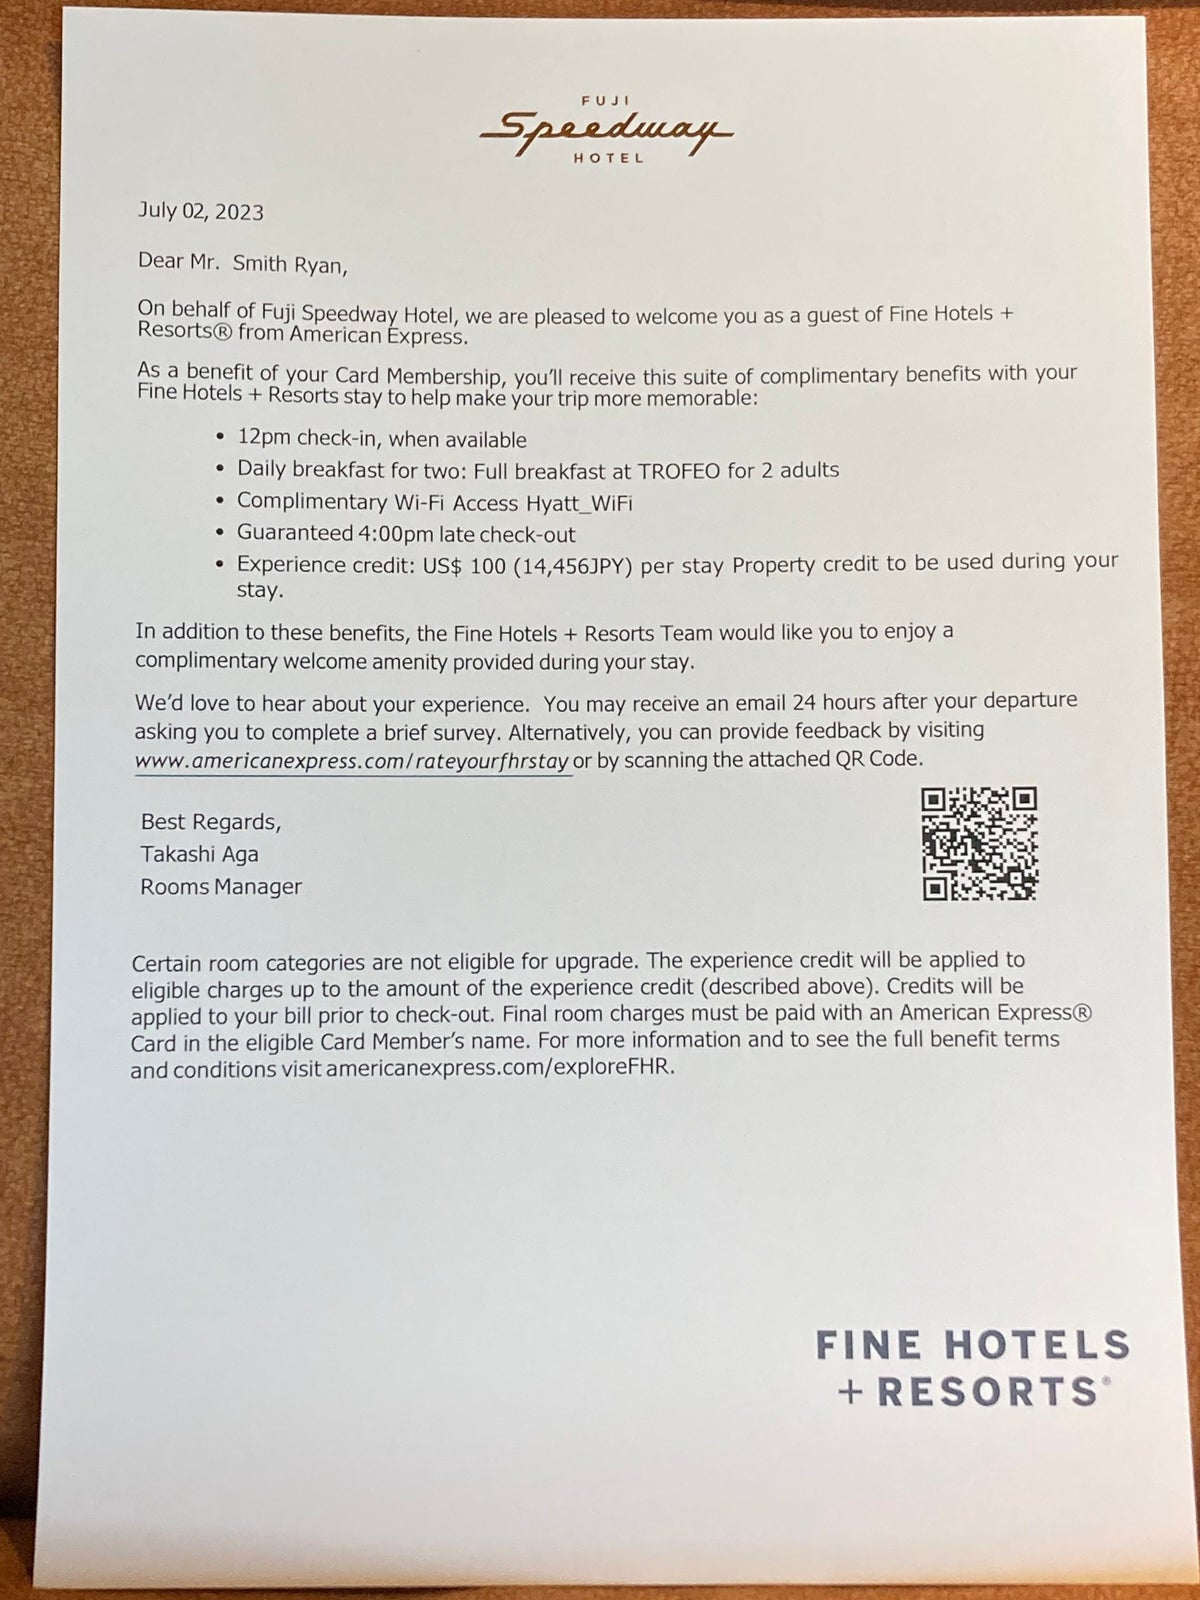 Fuji Speedway Hotel FHR welcome letter